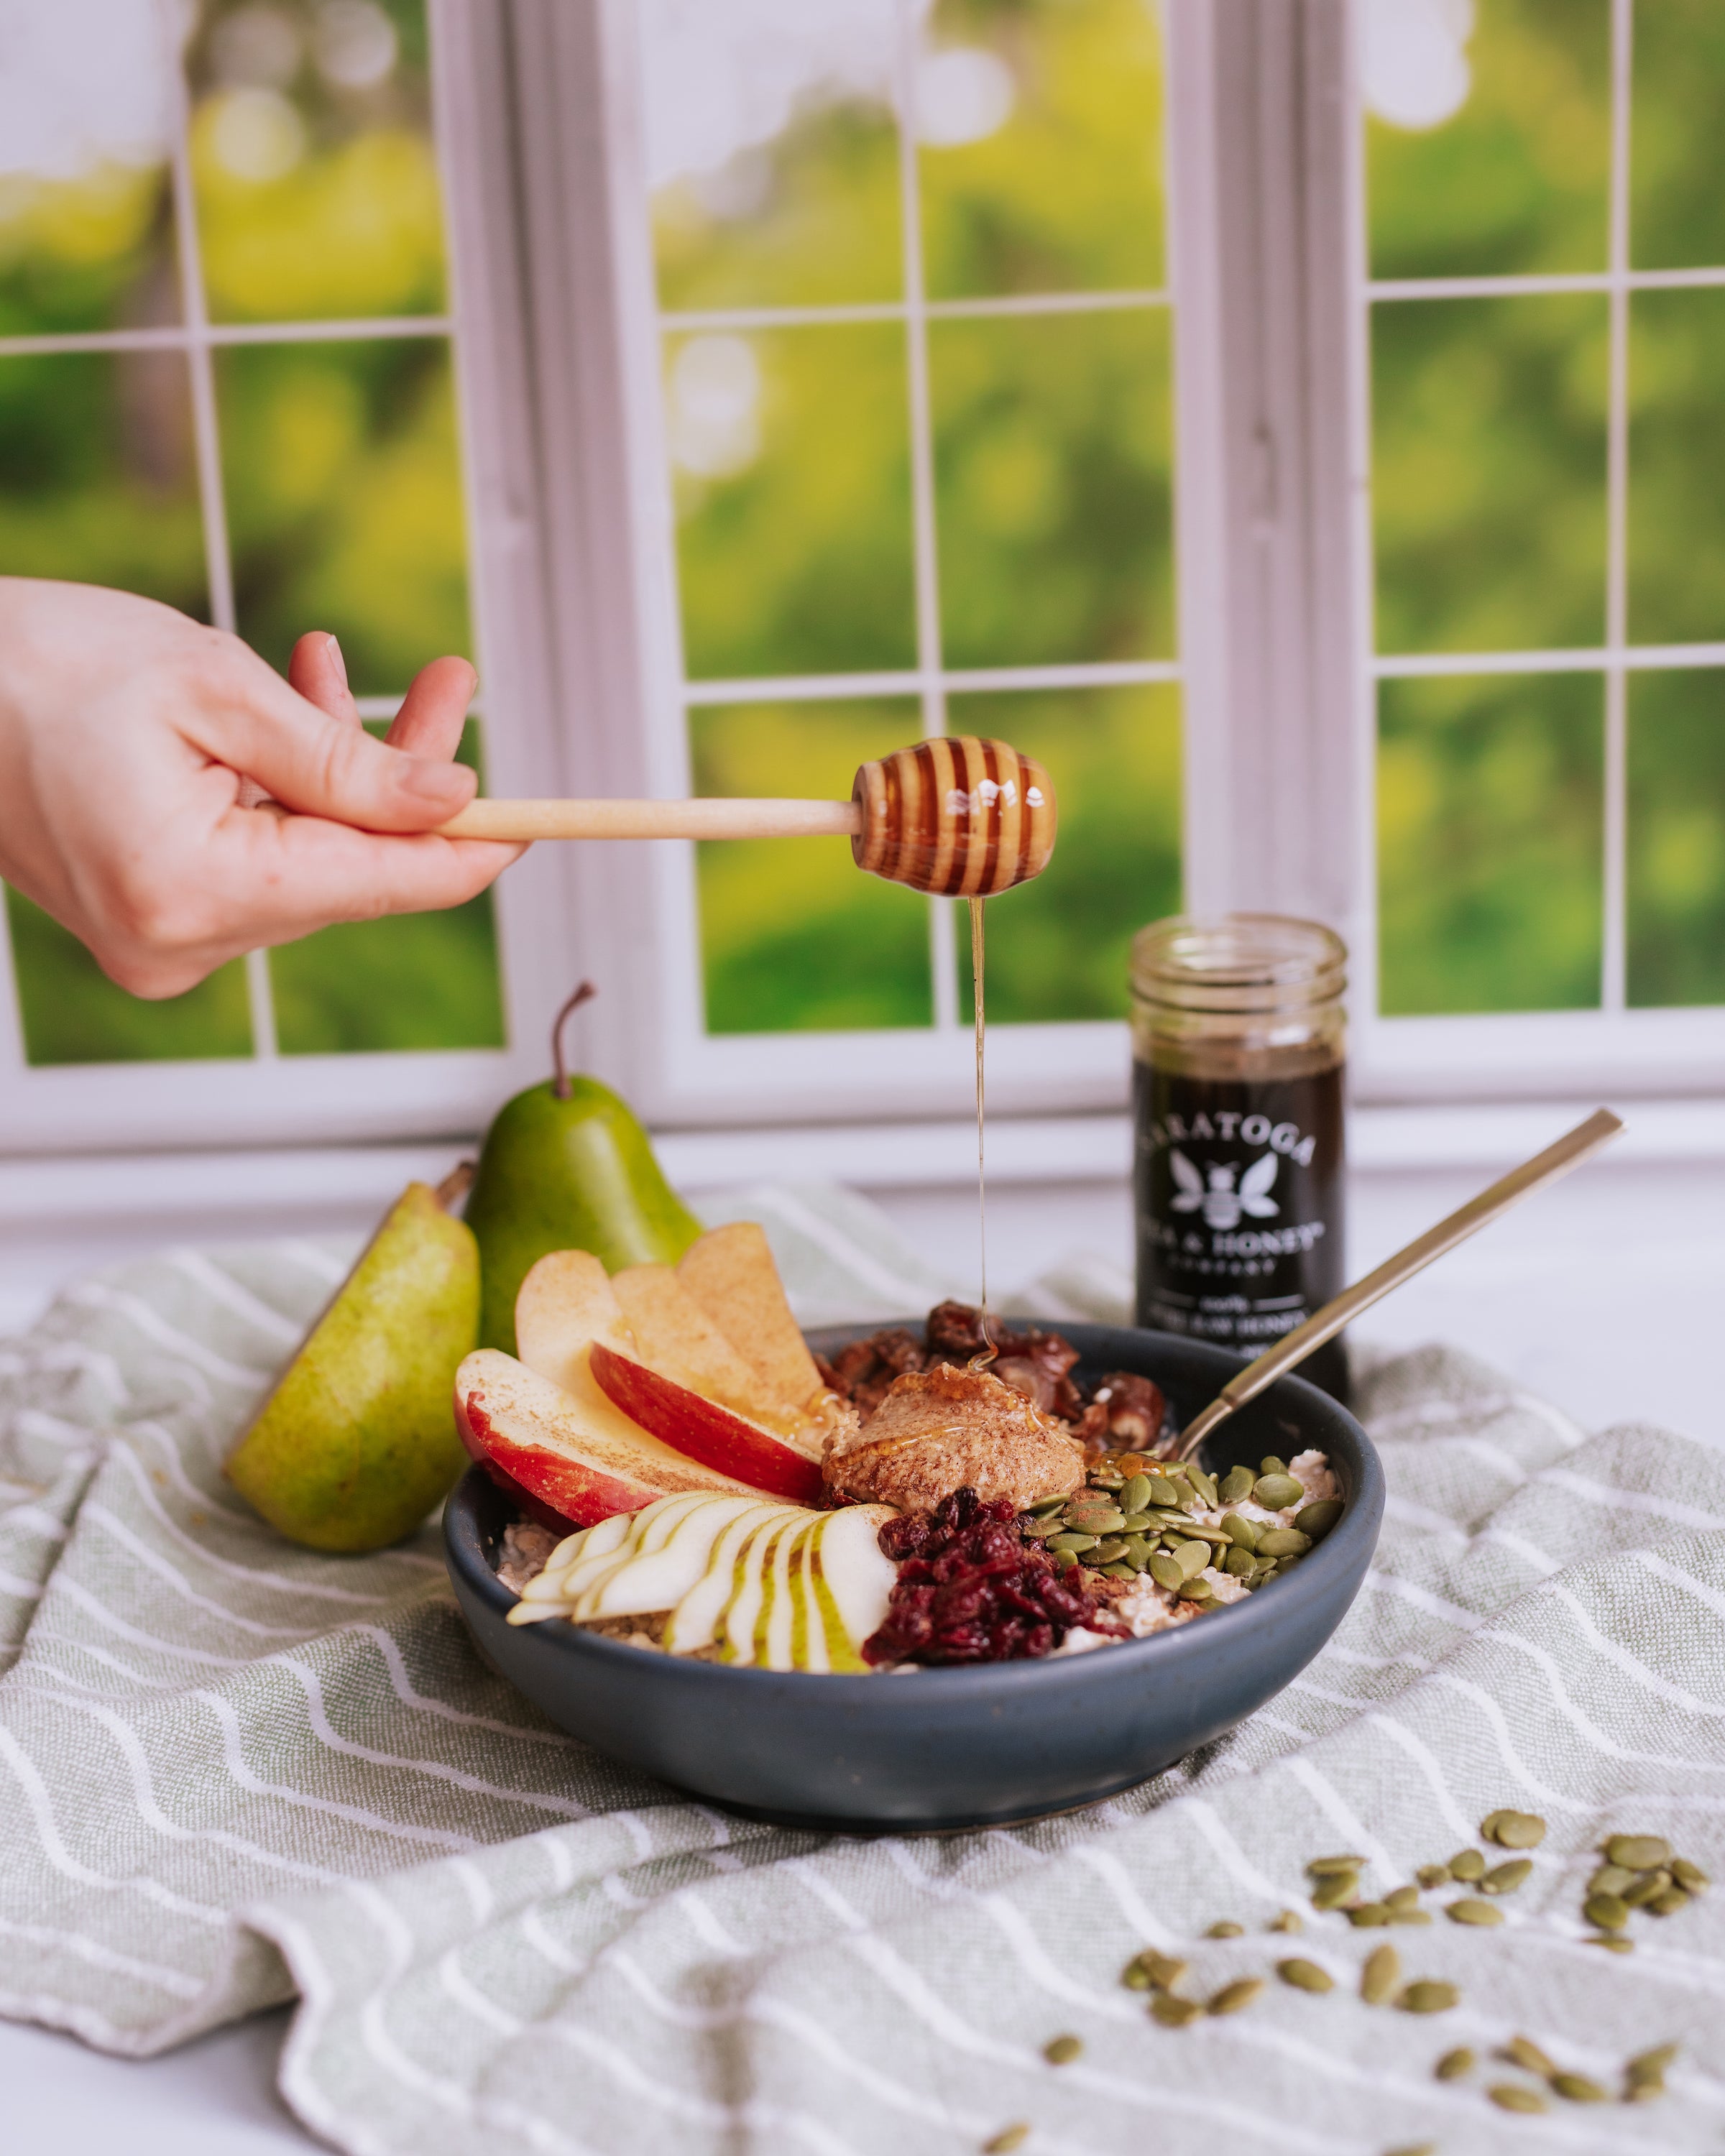 hand drizzling pumpkin spice honey over a breakfast power bowl with apples, pears, nutbutter, and dried fruit